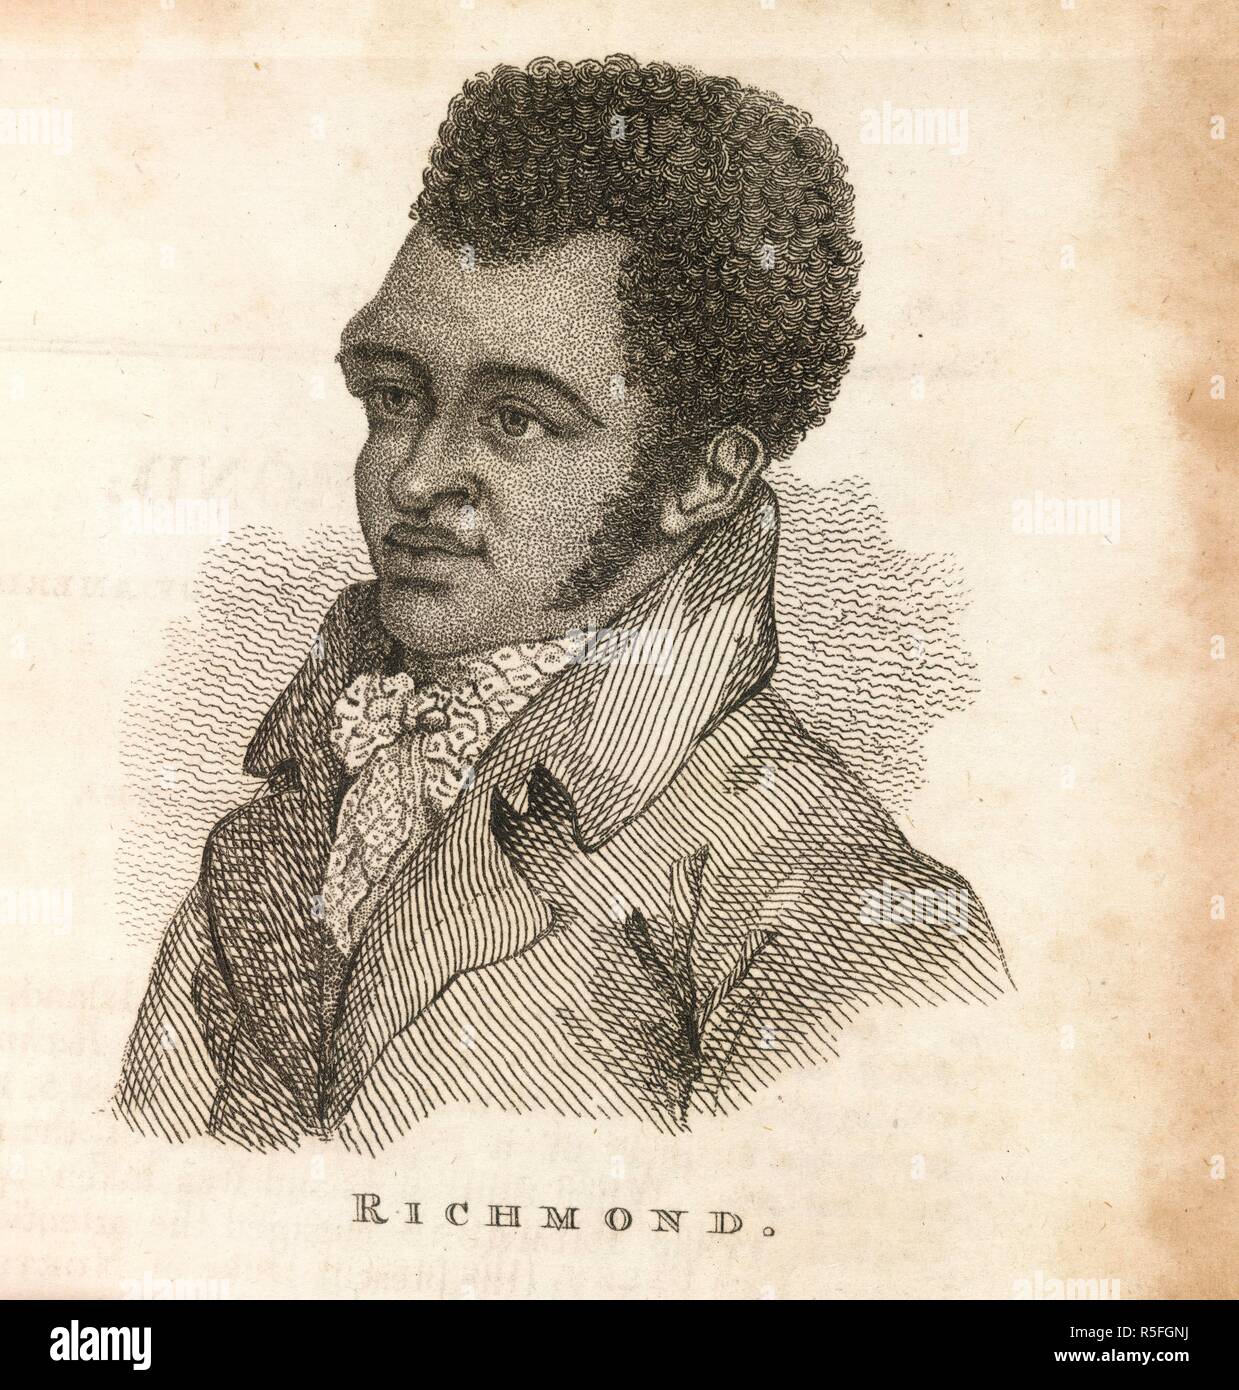 Bill Richmond. Boxiana; or Sketches of ancient and modern pugilis. G. Smeeton: London, 1812. Bill Richmond (1763-1829). Pugilist/Boxer. Portrait. The son of former slaves, Richmond became a respected boxer. He fought a famous match against the British champion Tom Cribb in 1805. After retirement he established a boxing academy in London. Became a popular publican and respected member of the Fancy.  Image taken from Boxiana; or Sketches of ancient and modern pugilism; from the days of the reowned Broughton and Slack, to the heroes of the present milling Ã¦ra! By One of the Fancy [i.e. Pierce Eg Stock Photo